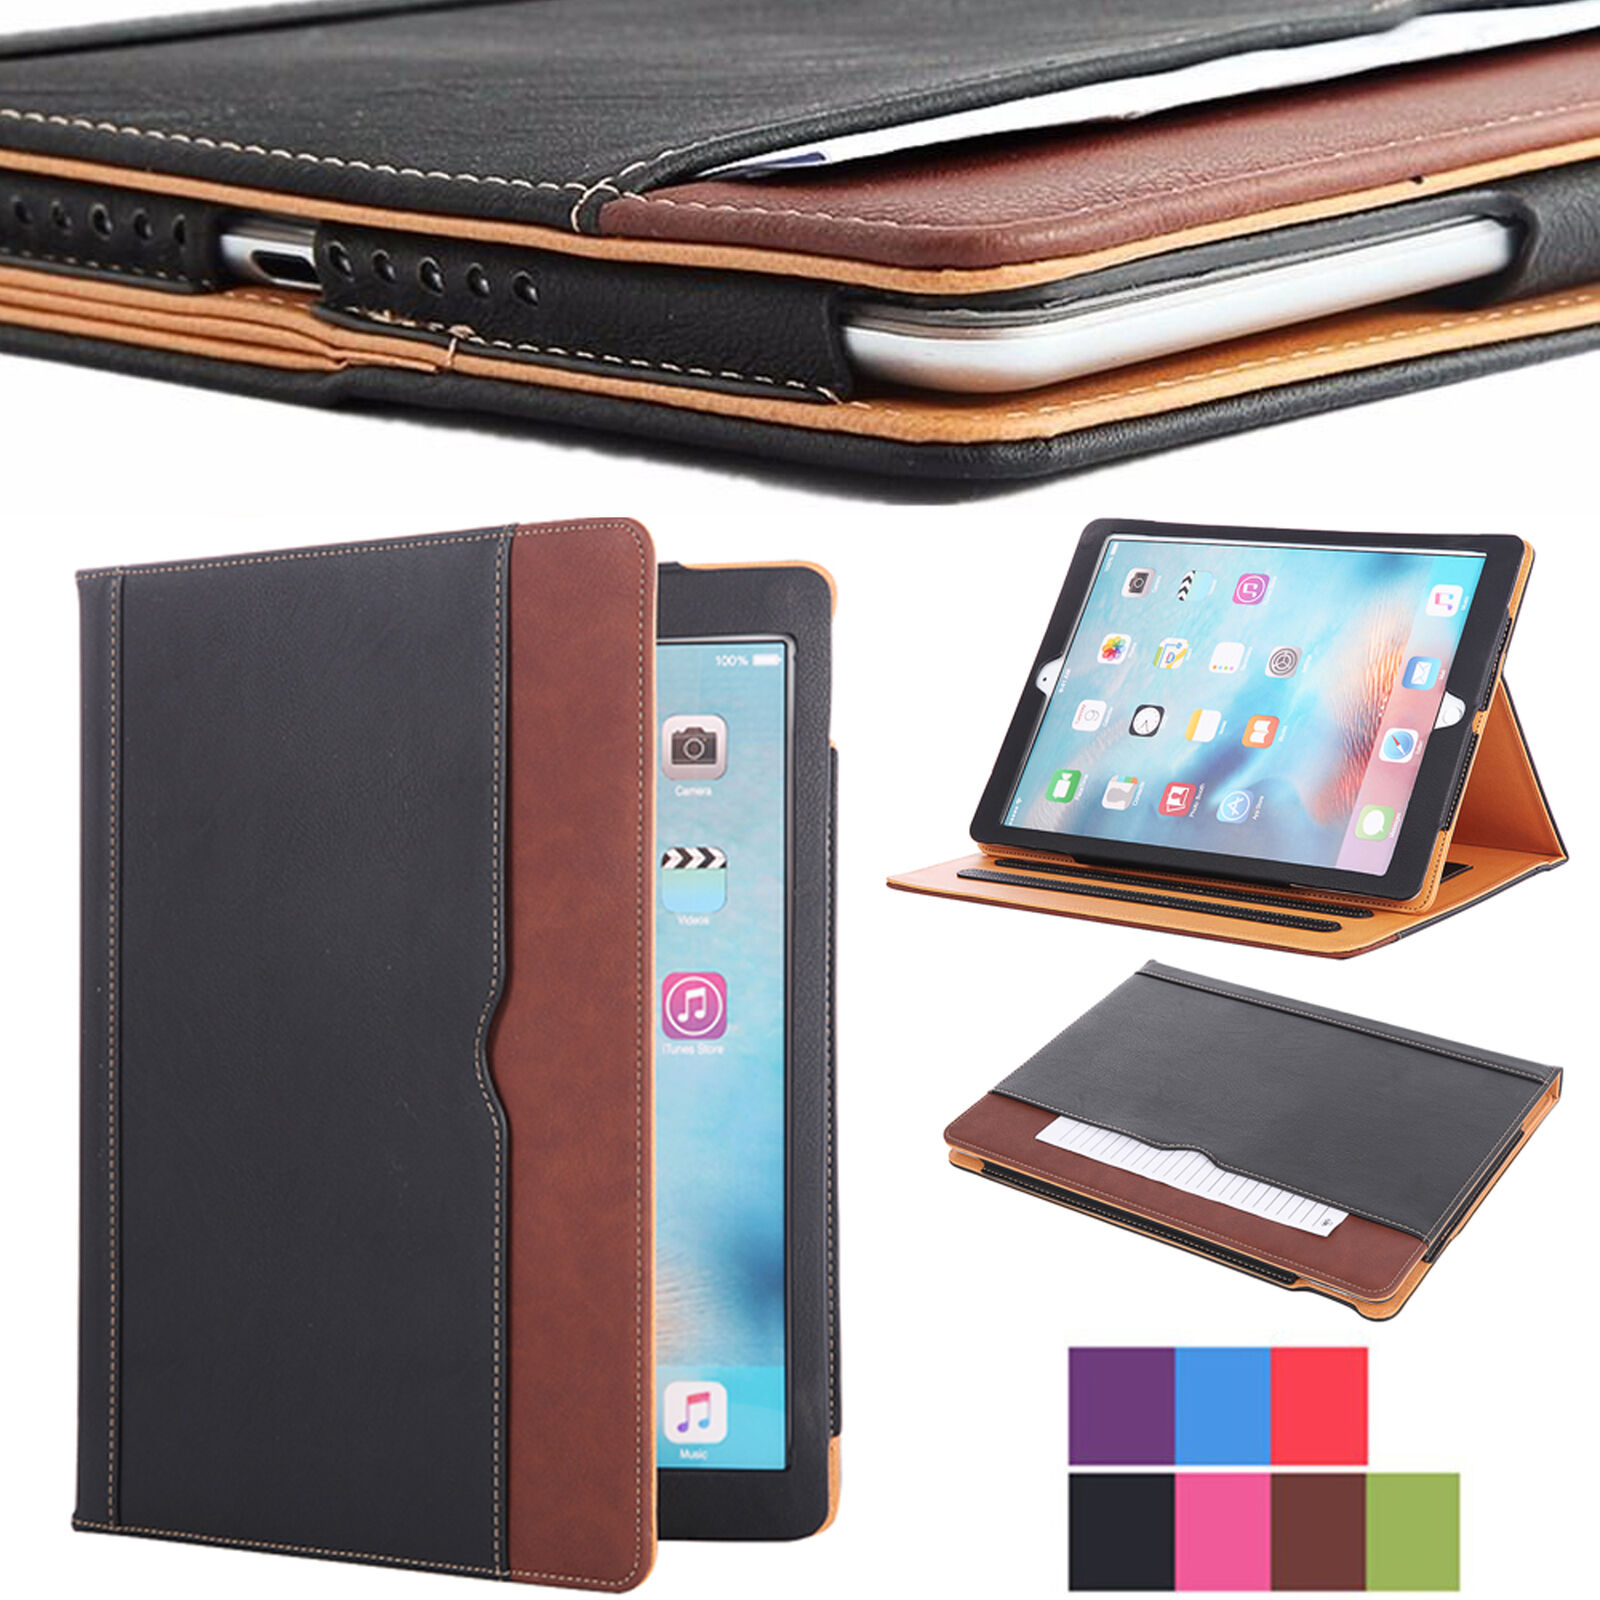 iPad 9.7 6th Generation 2018 Soft Leather Smart Cover Case Sleep Wake For Apple